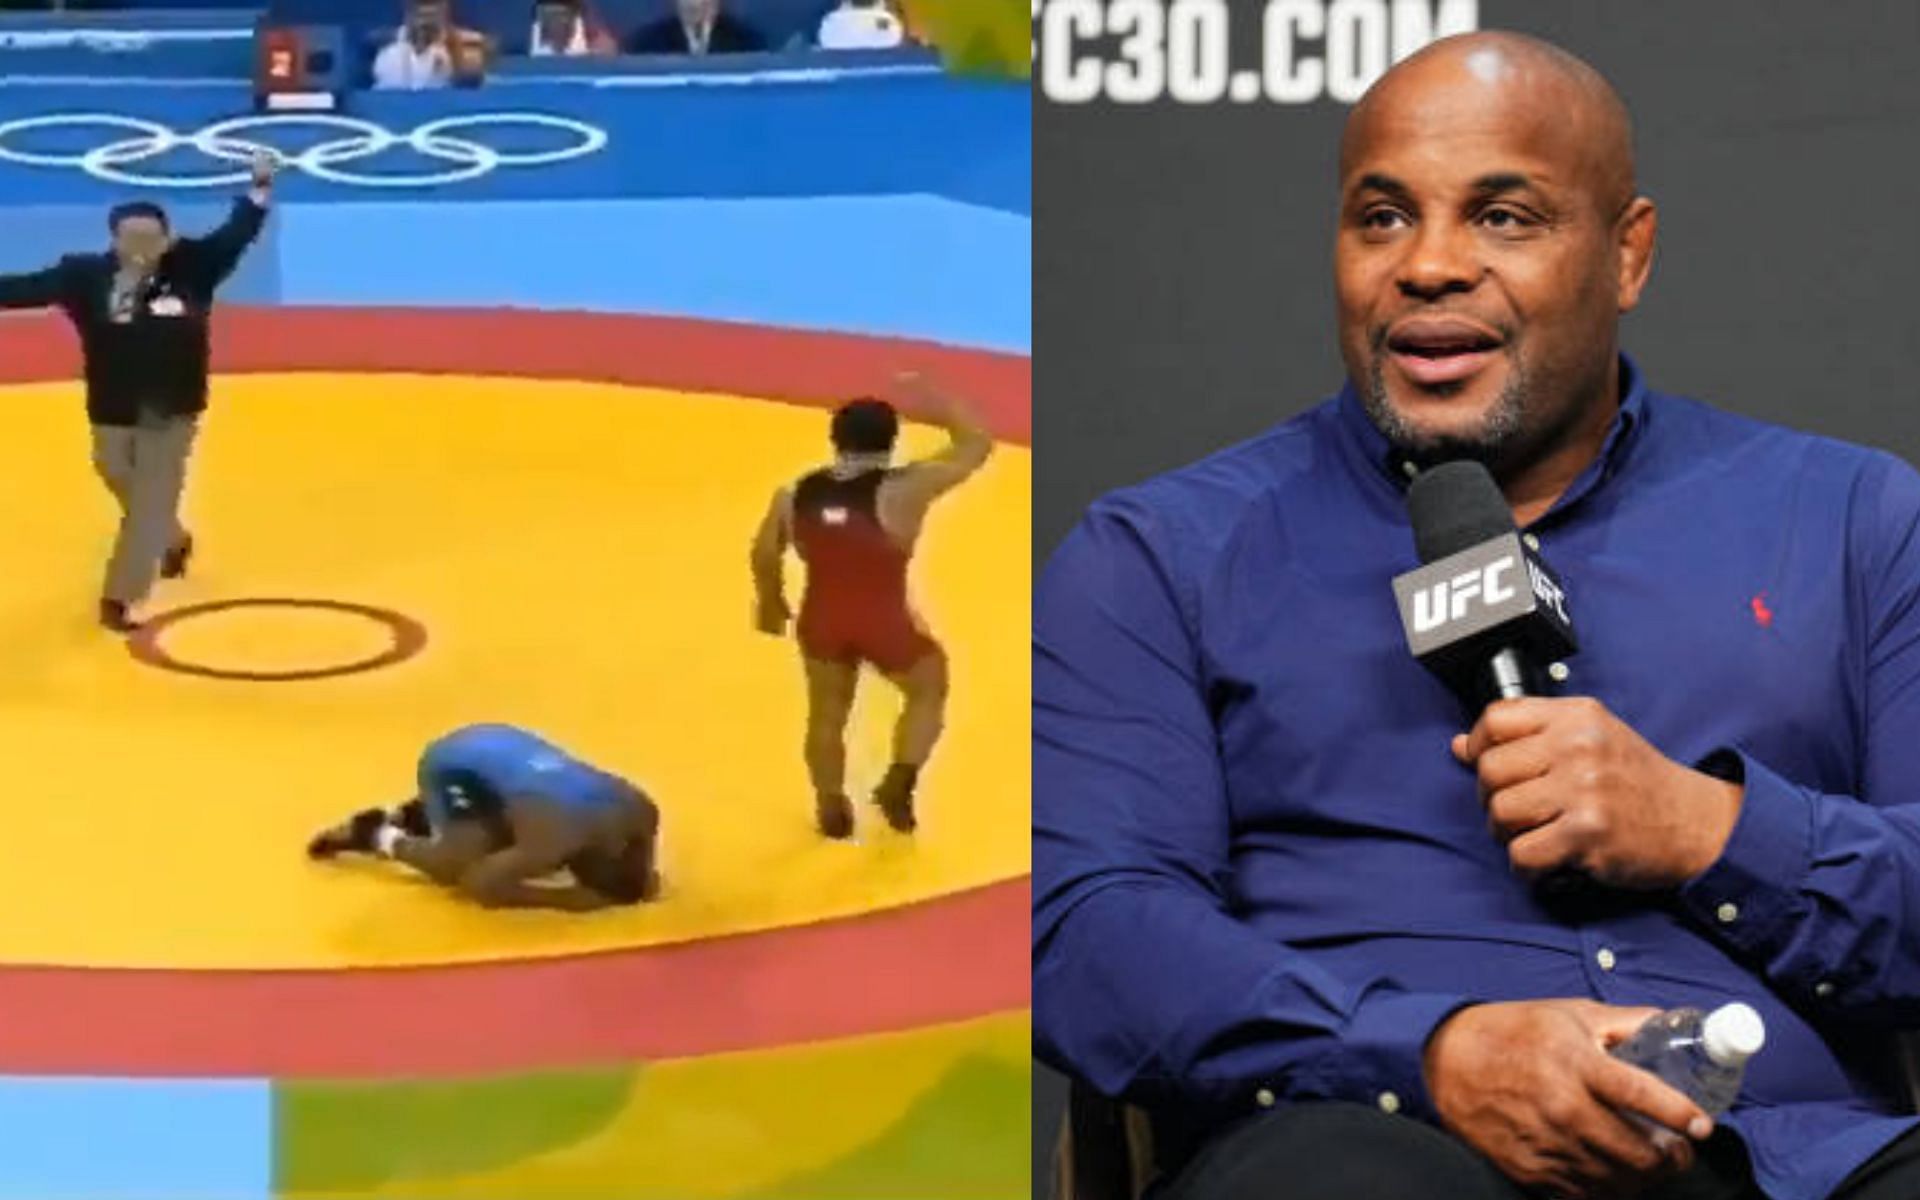 Daniel Cormier vs.Khadzhimurat Gatsalov at 2004 Olympics (left) and Daniel Cormier (right) [Images Courtesy: @talalalhuthali on X and @GettyImages]